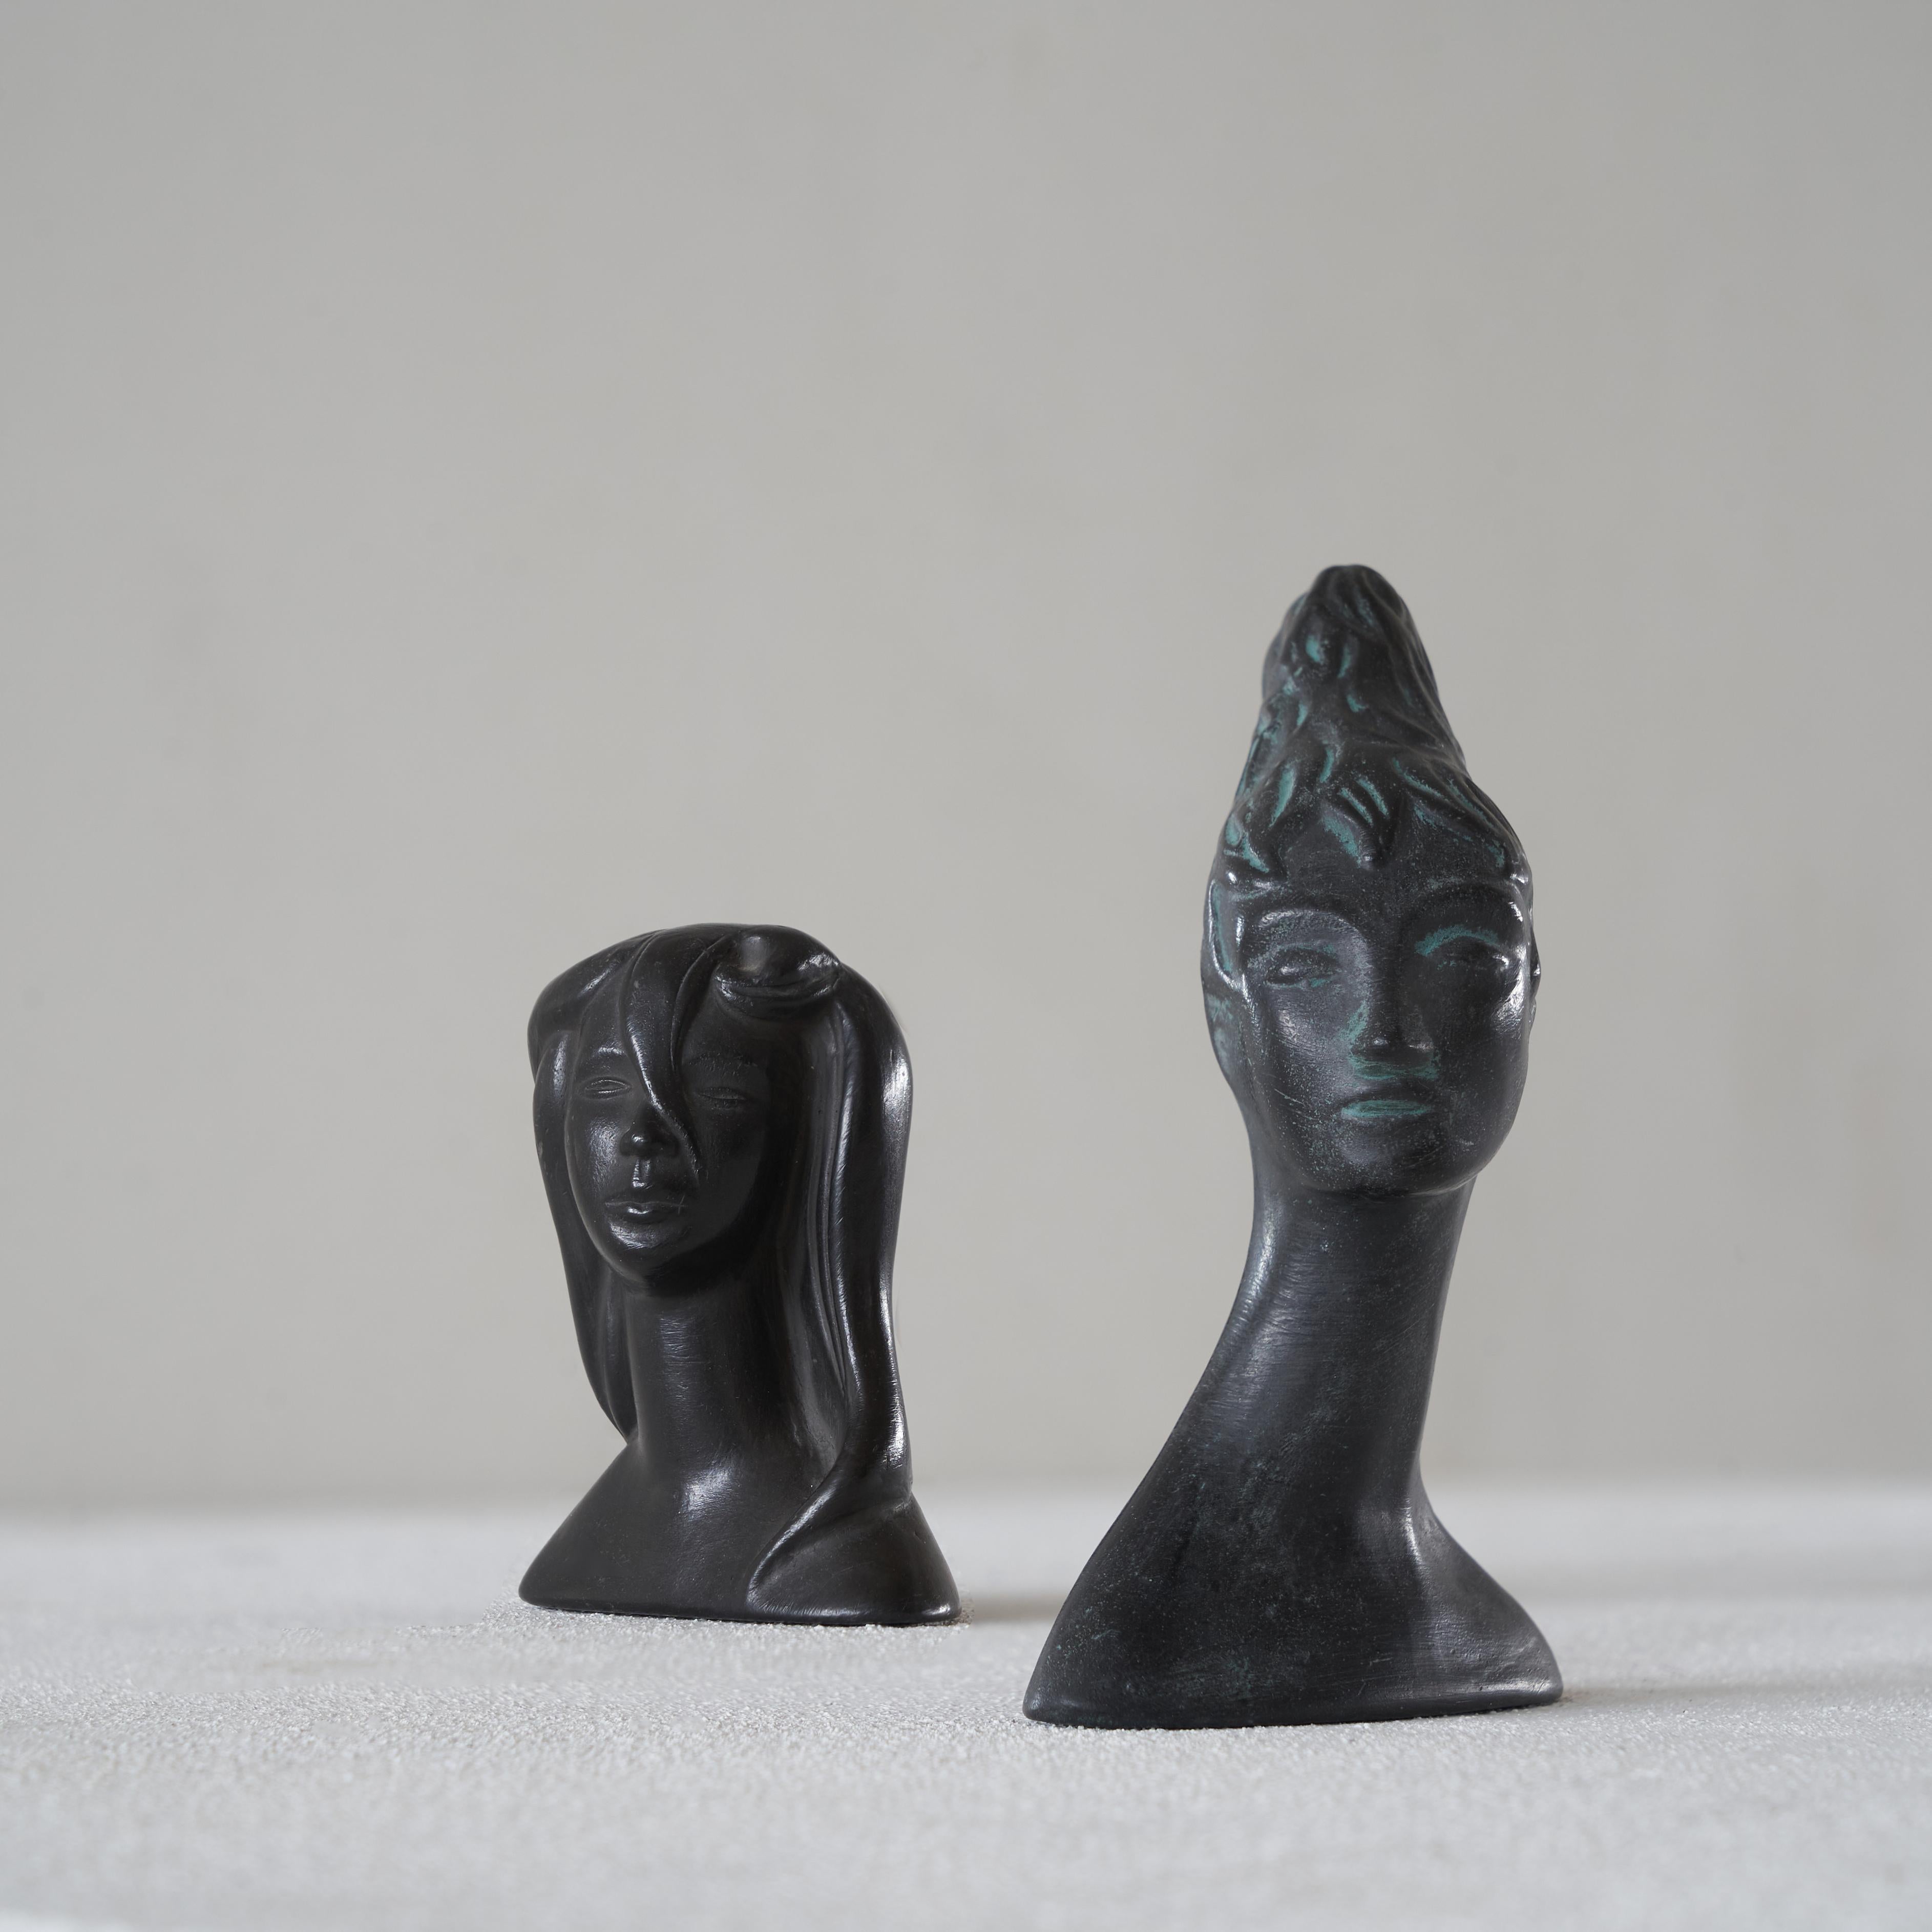 Carlo Alberto Rossi pair of 'Bucchero' female heads attributed to Giò Ponti. Mid-20th century, Italy.

This is a rare and marvelous pair of little mid-century ceramic heads by Carlo Alberto Rossi after a design attributed to Giò Ponti. Very